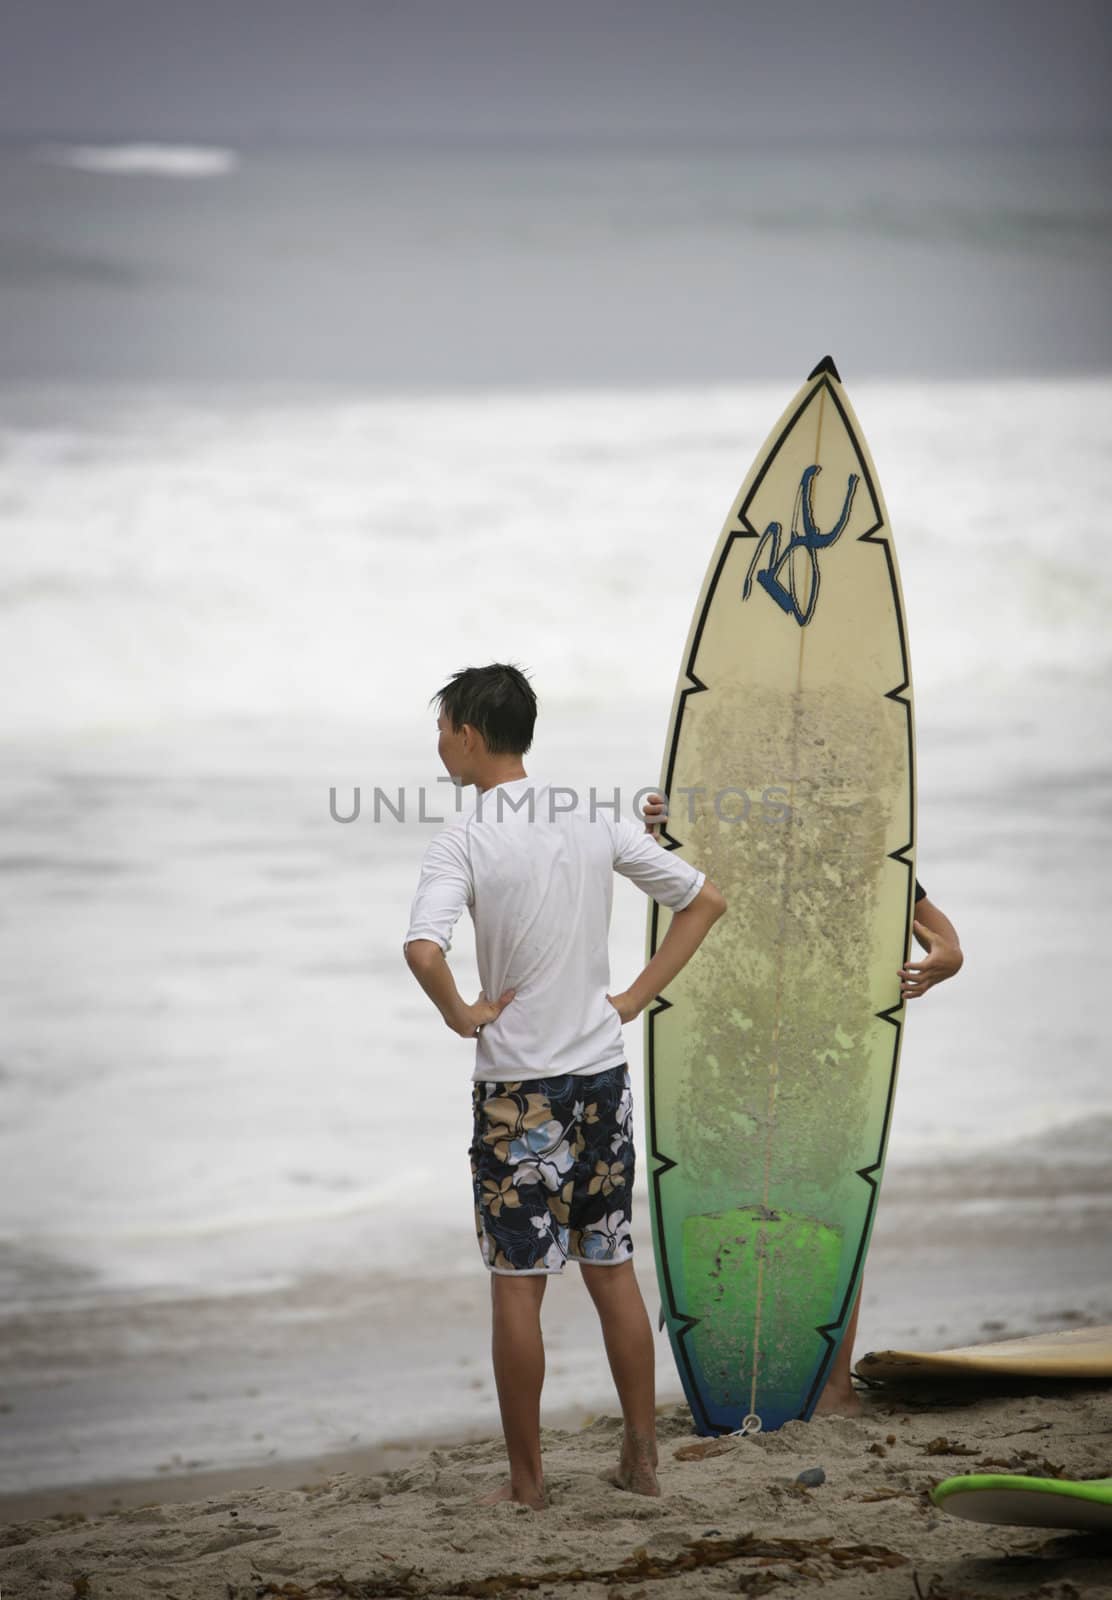 young surfer standing on the beach with surfboard